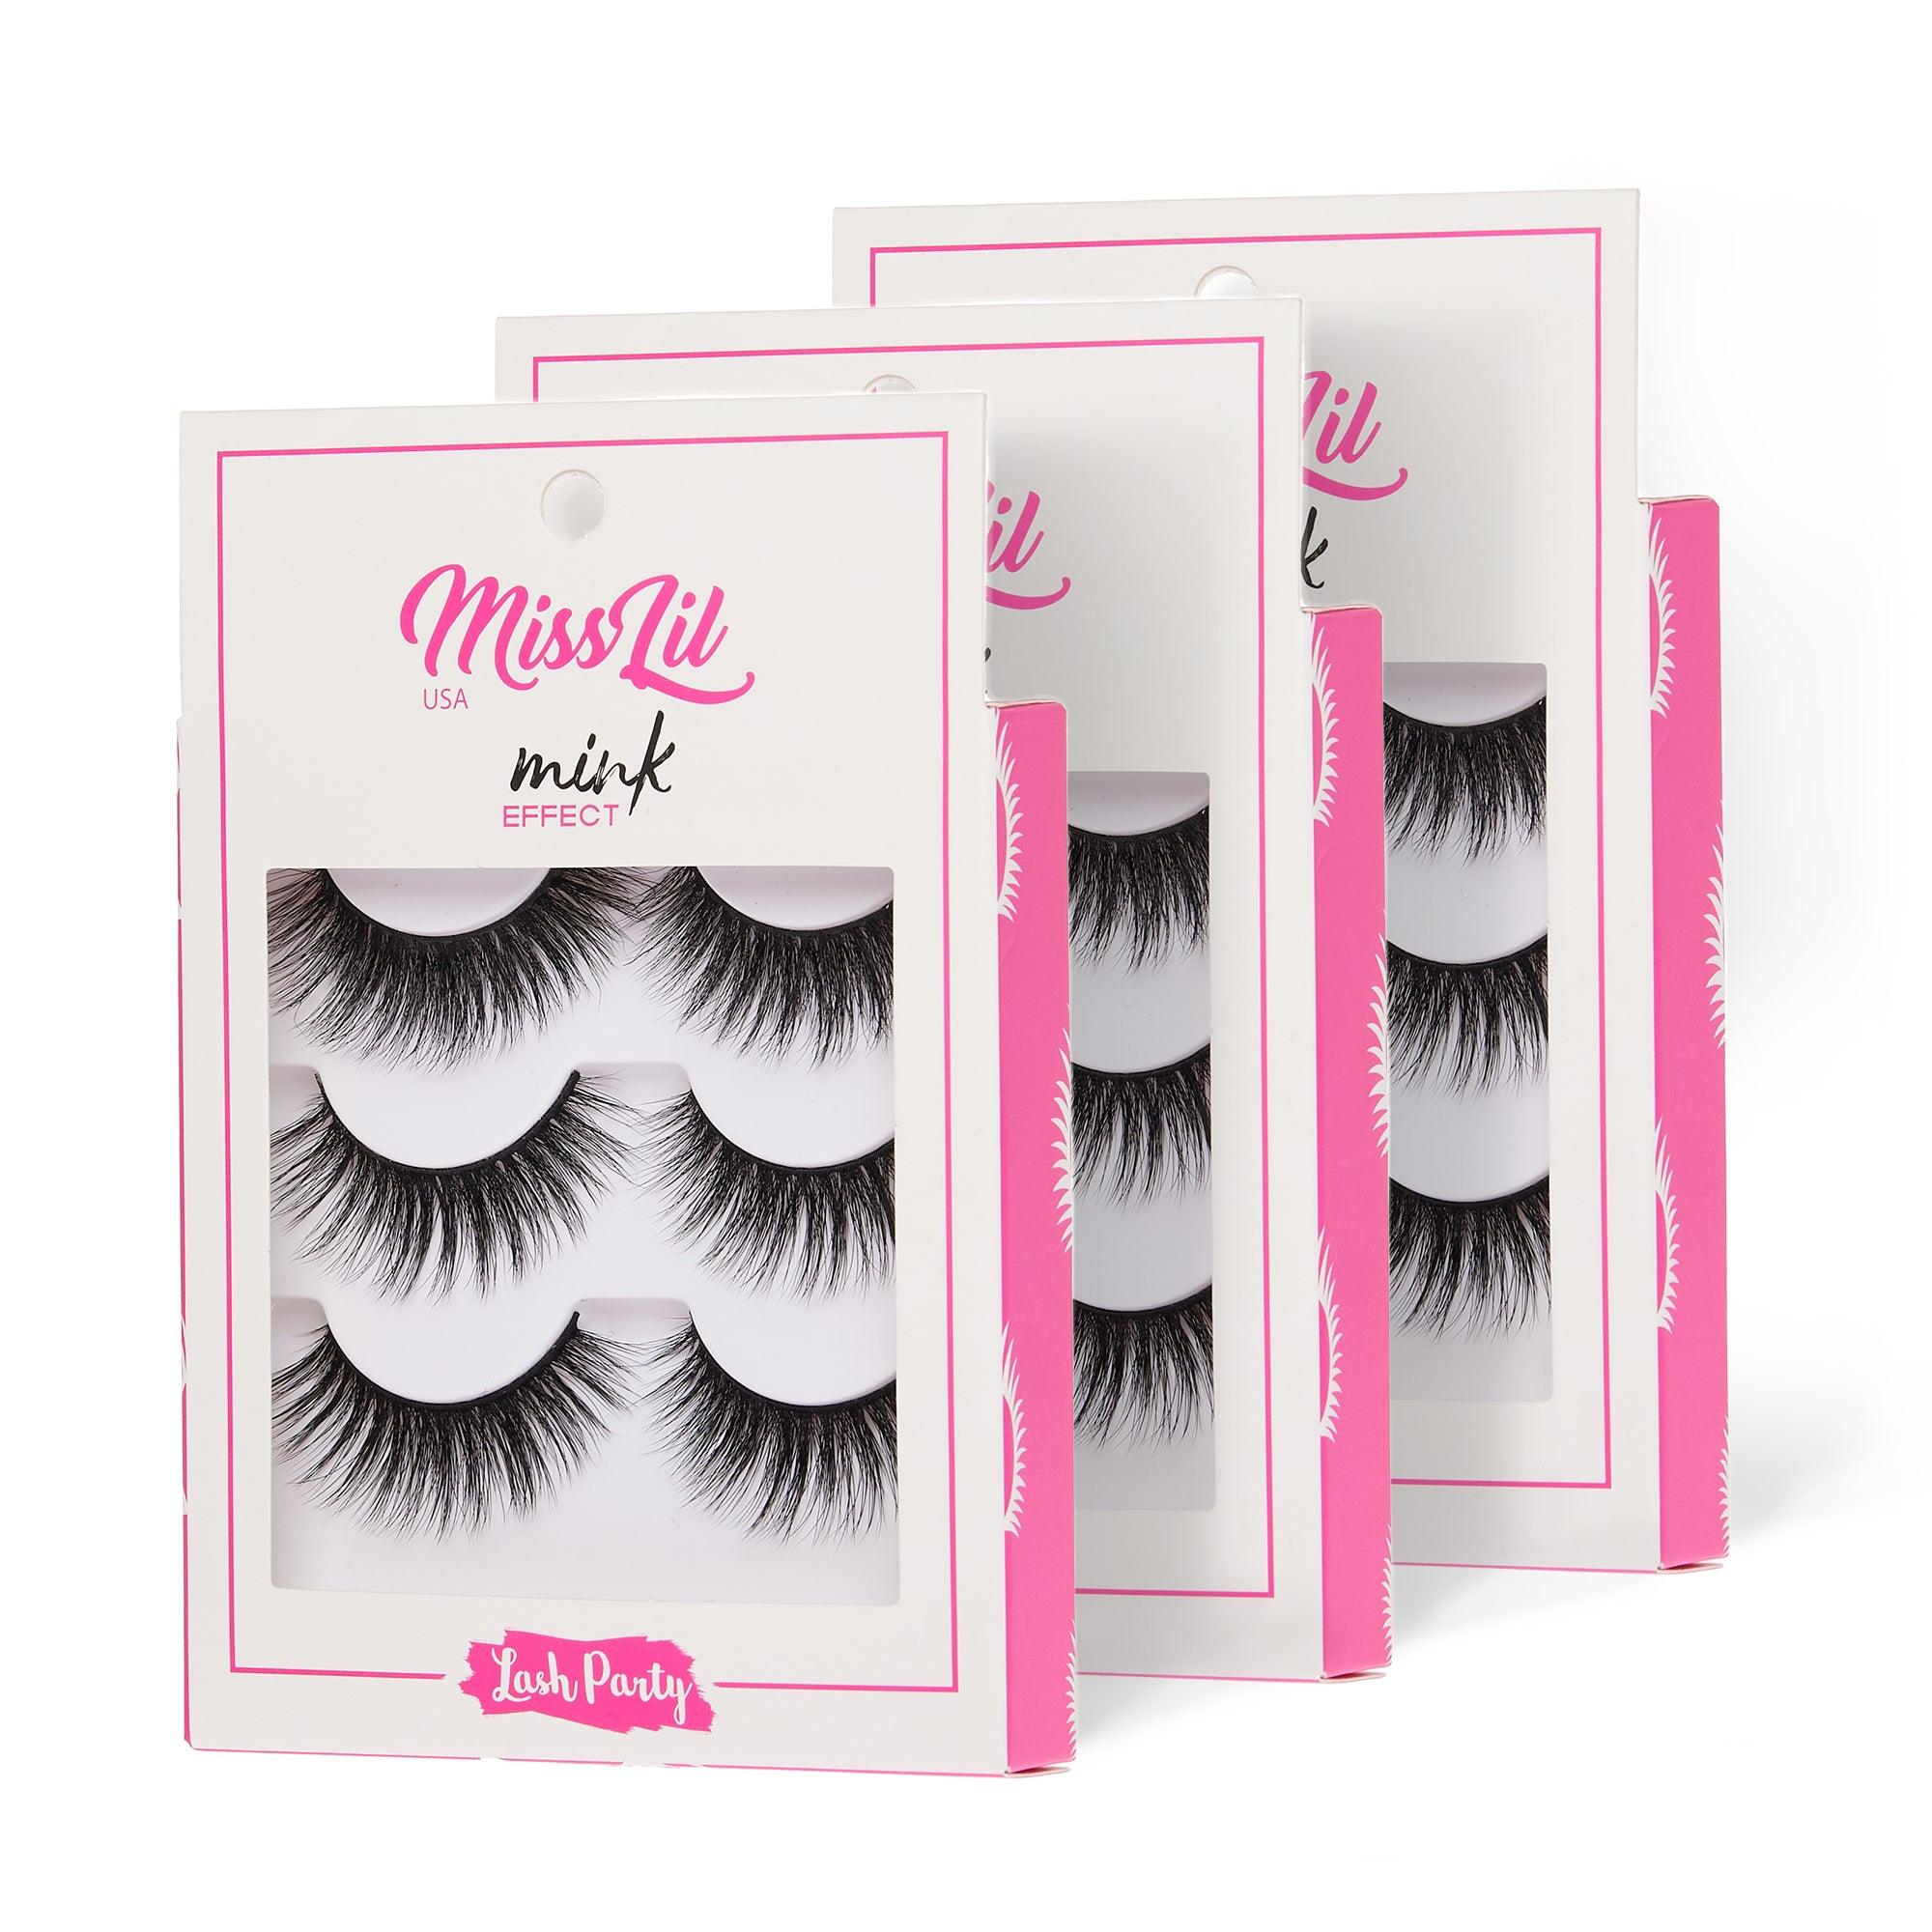 3-Pair Faux Mink Effect Eyelashes - Lash Party Collection #3 - Pack of 3 - Miss Lil USA